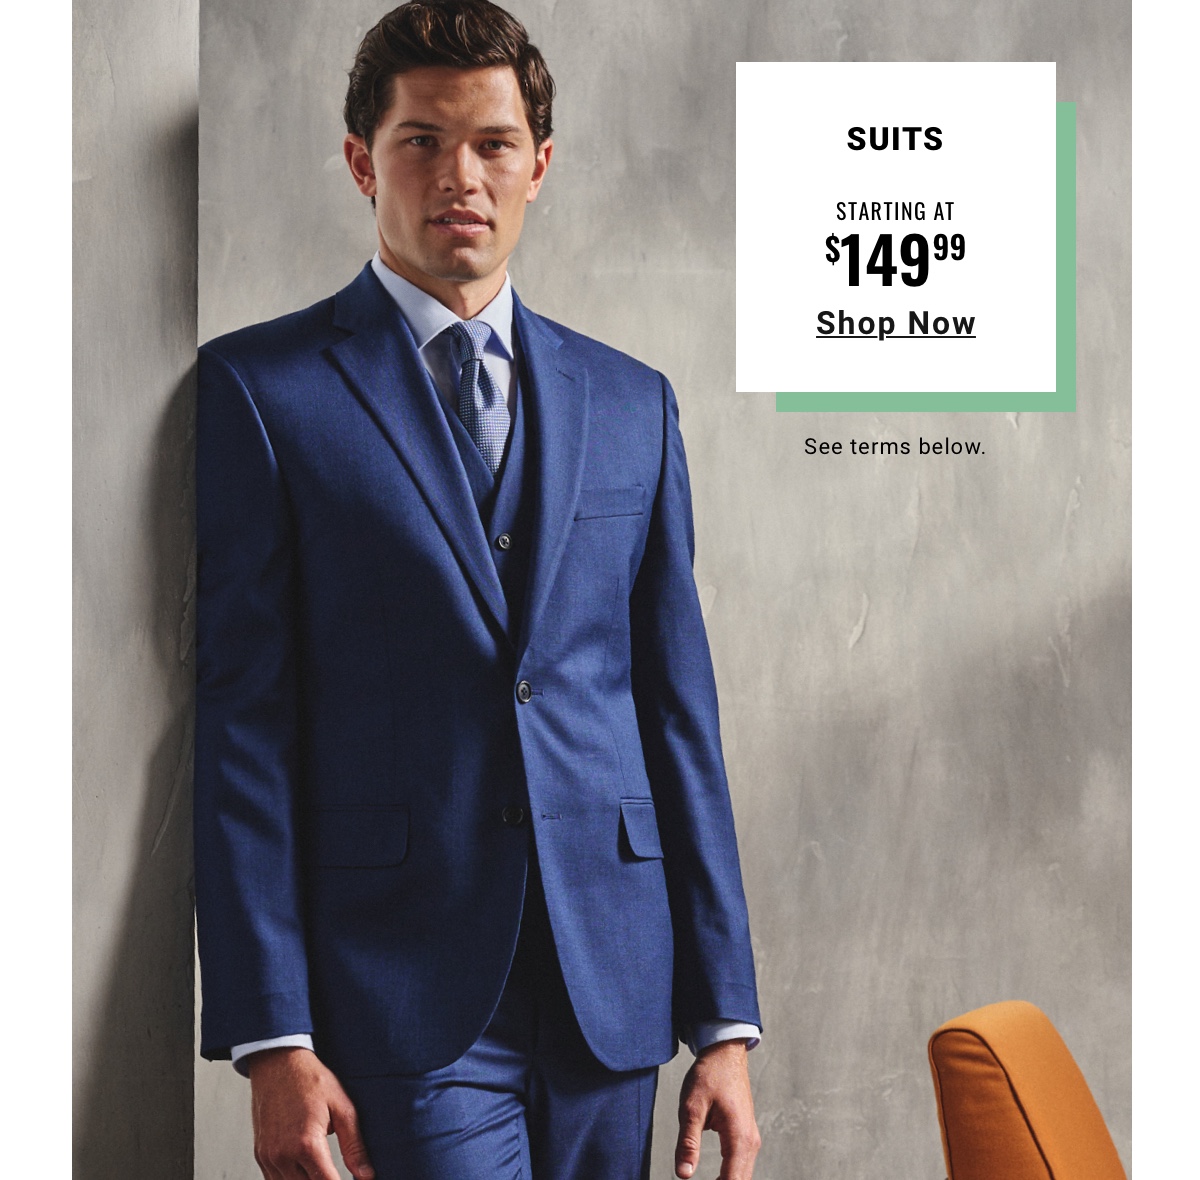 Suits Starting at $149.99 - Shop Now